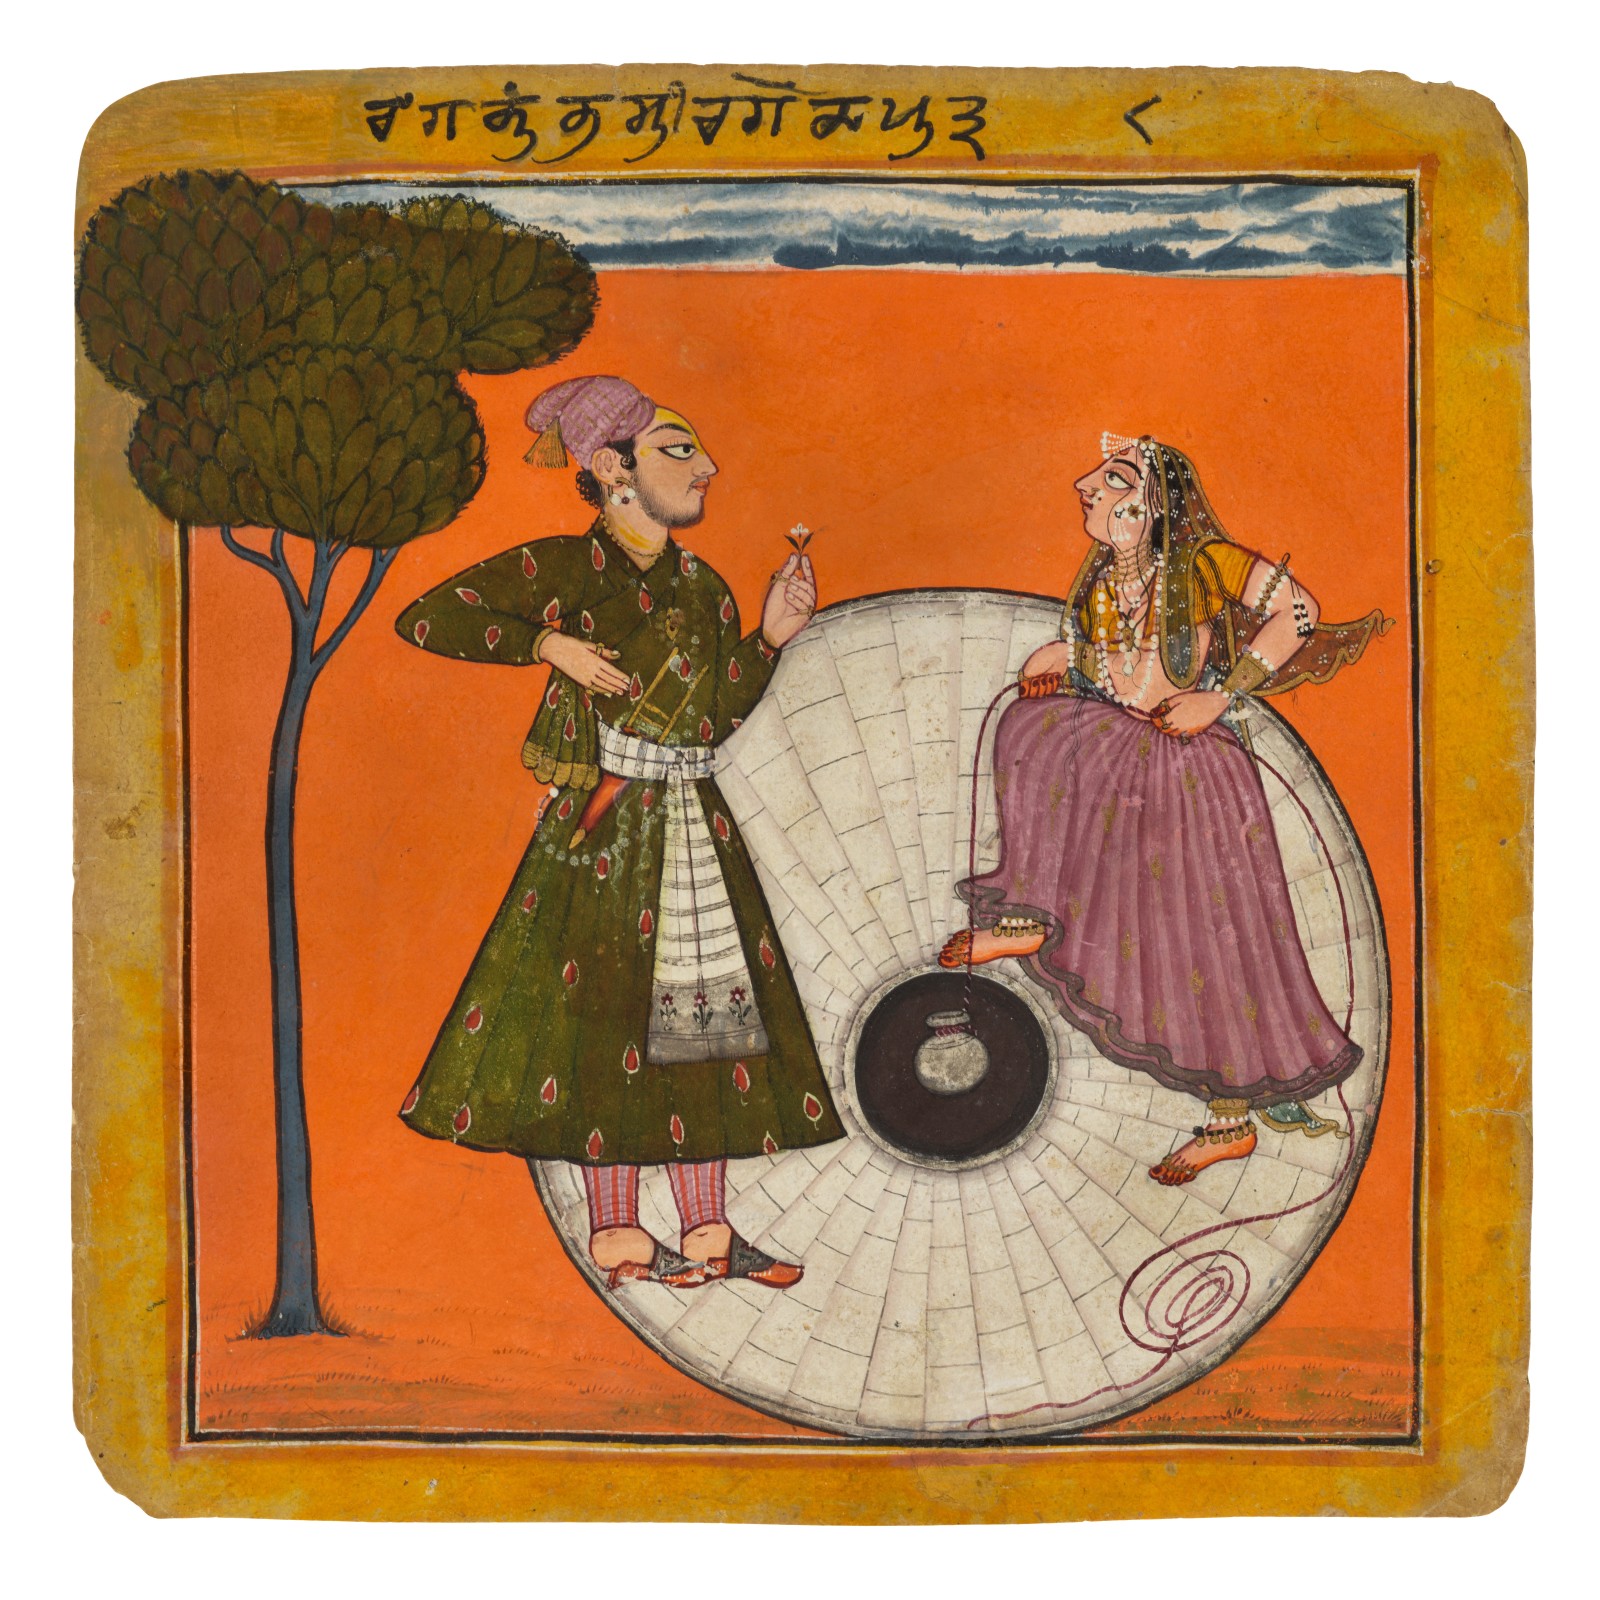 Kumbha putra of Shri raga, a girl at a well draws a pot of water for her admirer; Folio from a Ragamala series, Basohli, c. 1690–95